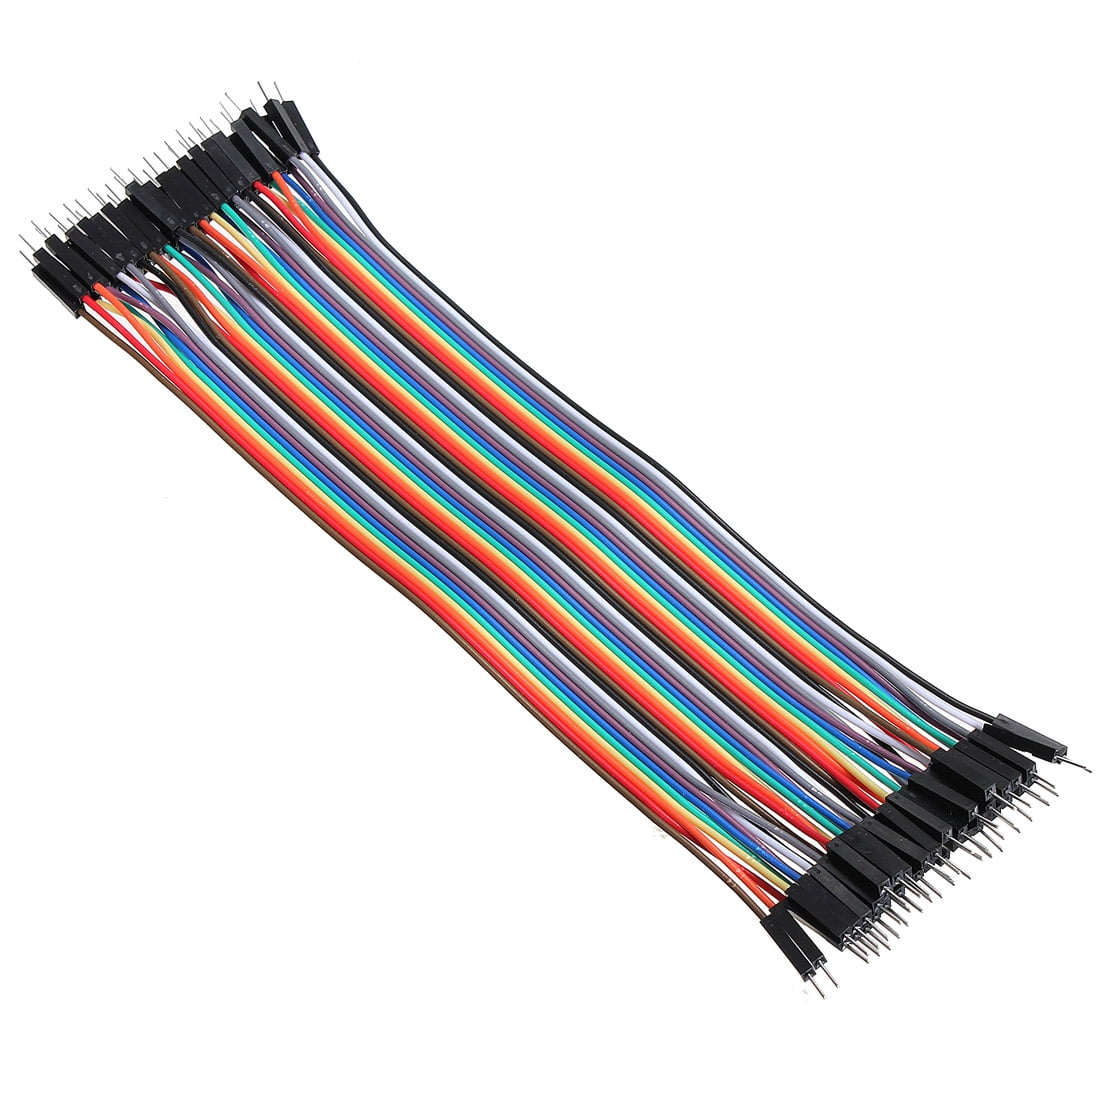 Female male cable 40pcs Dupont Jumper Cable 30cm Breadboard for Arduino Project 